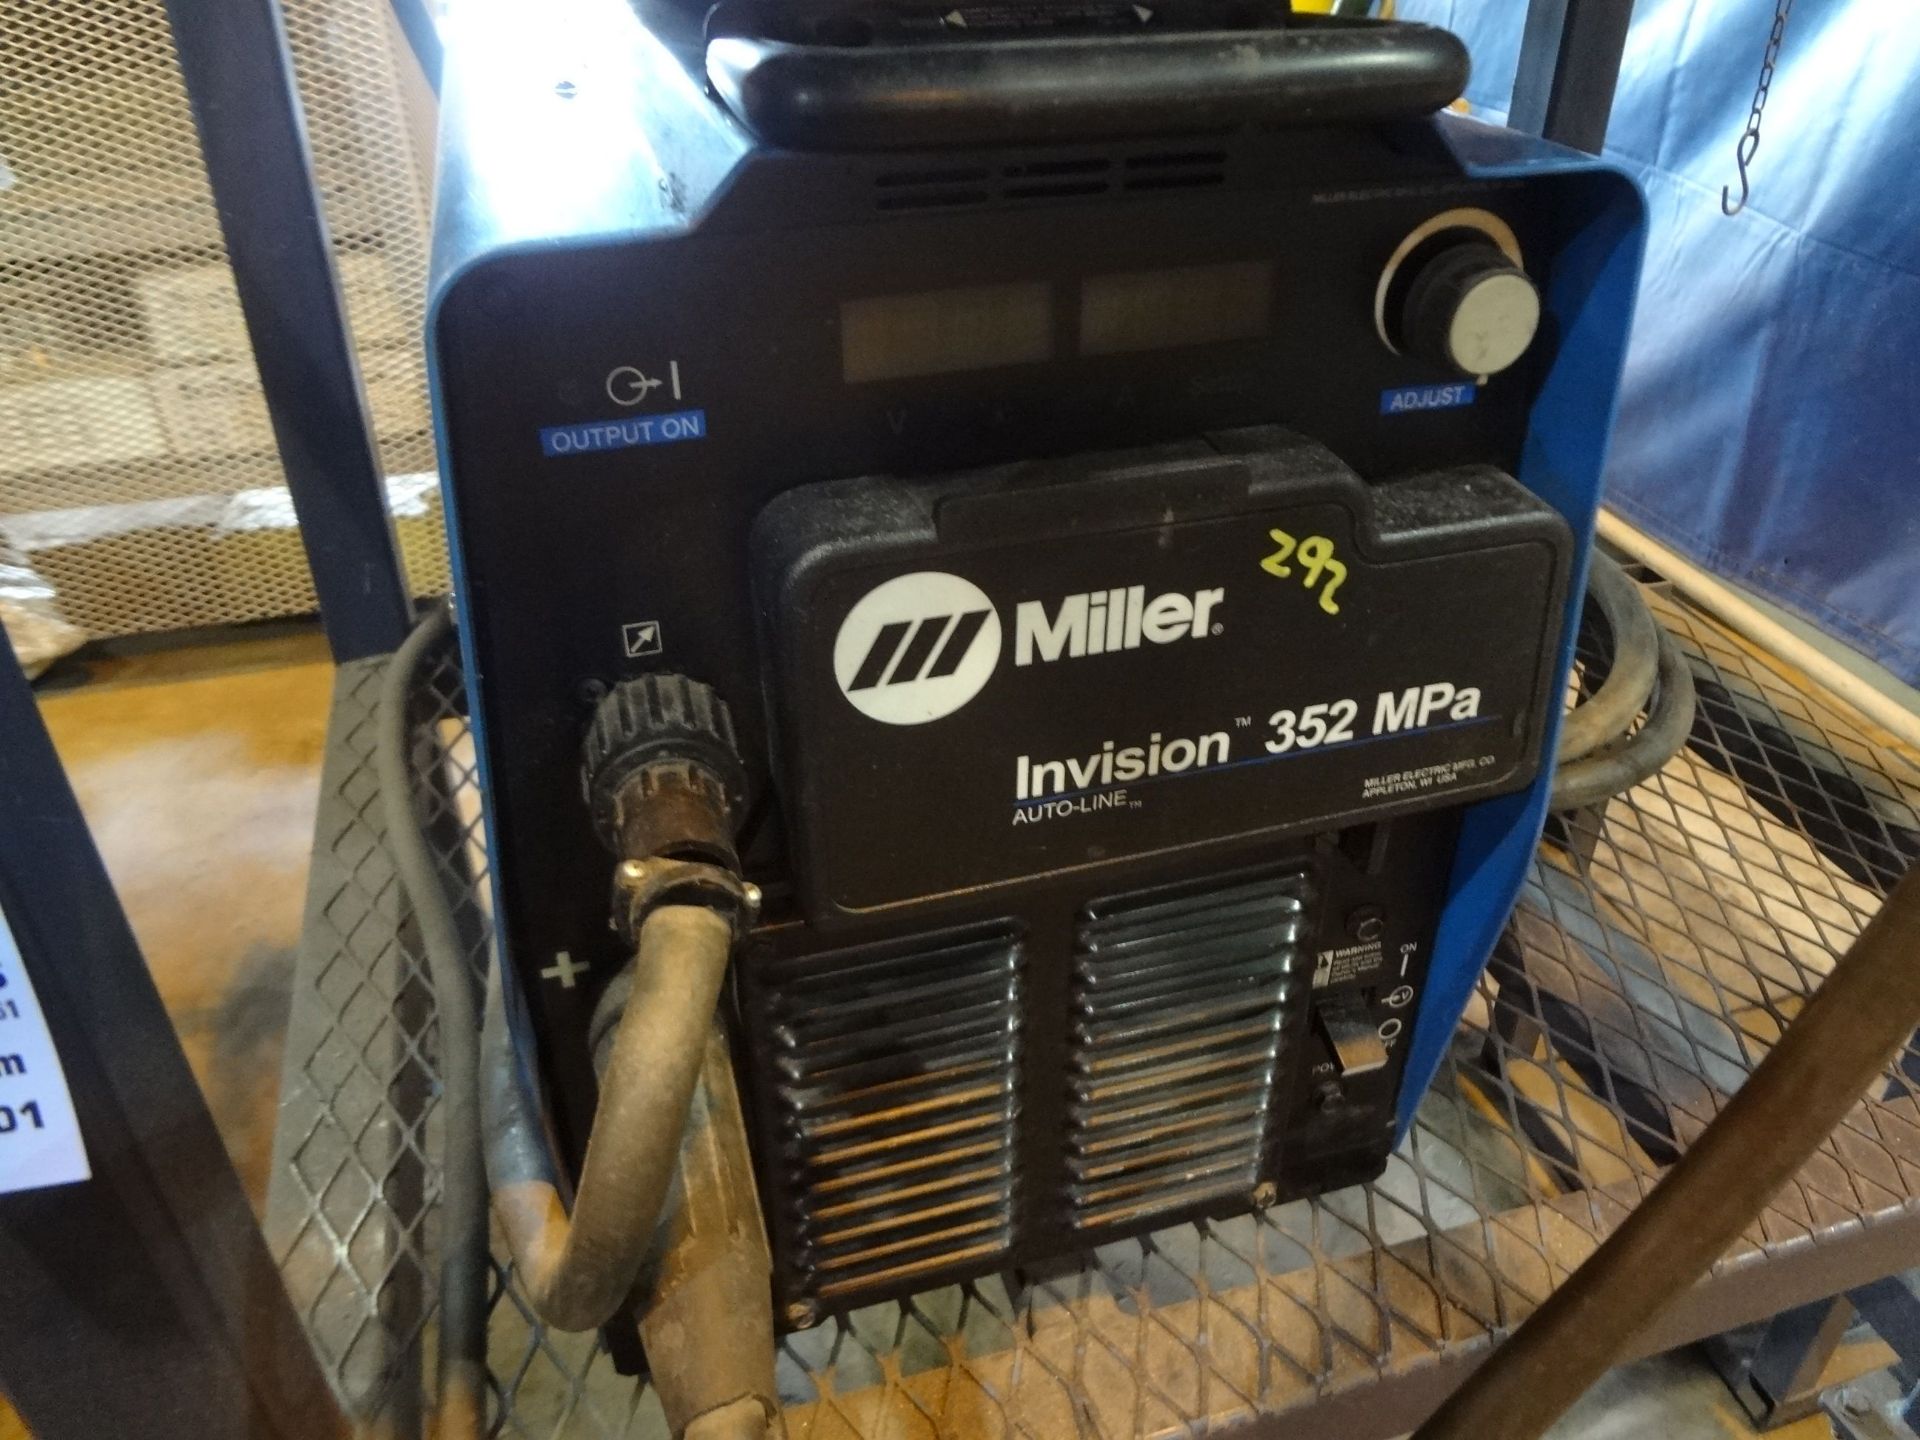 350 AMP MILLER INVISION 352 MPA AUTOLINE WELDER; S/N MD300139U, W/ MILLER S-74 MPA PLUS WIRE FEED - Image 2 of 3